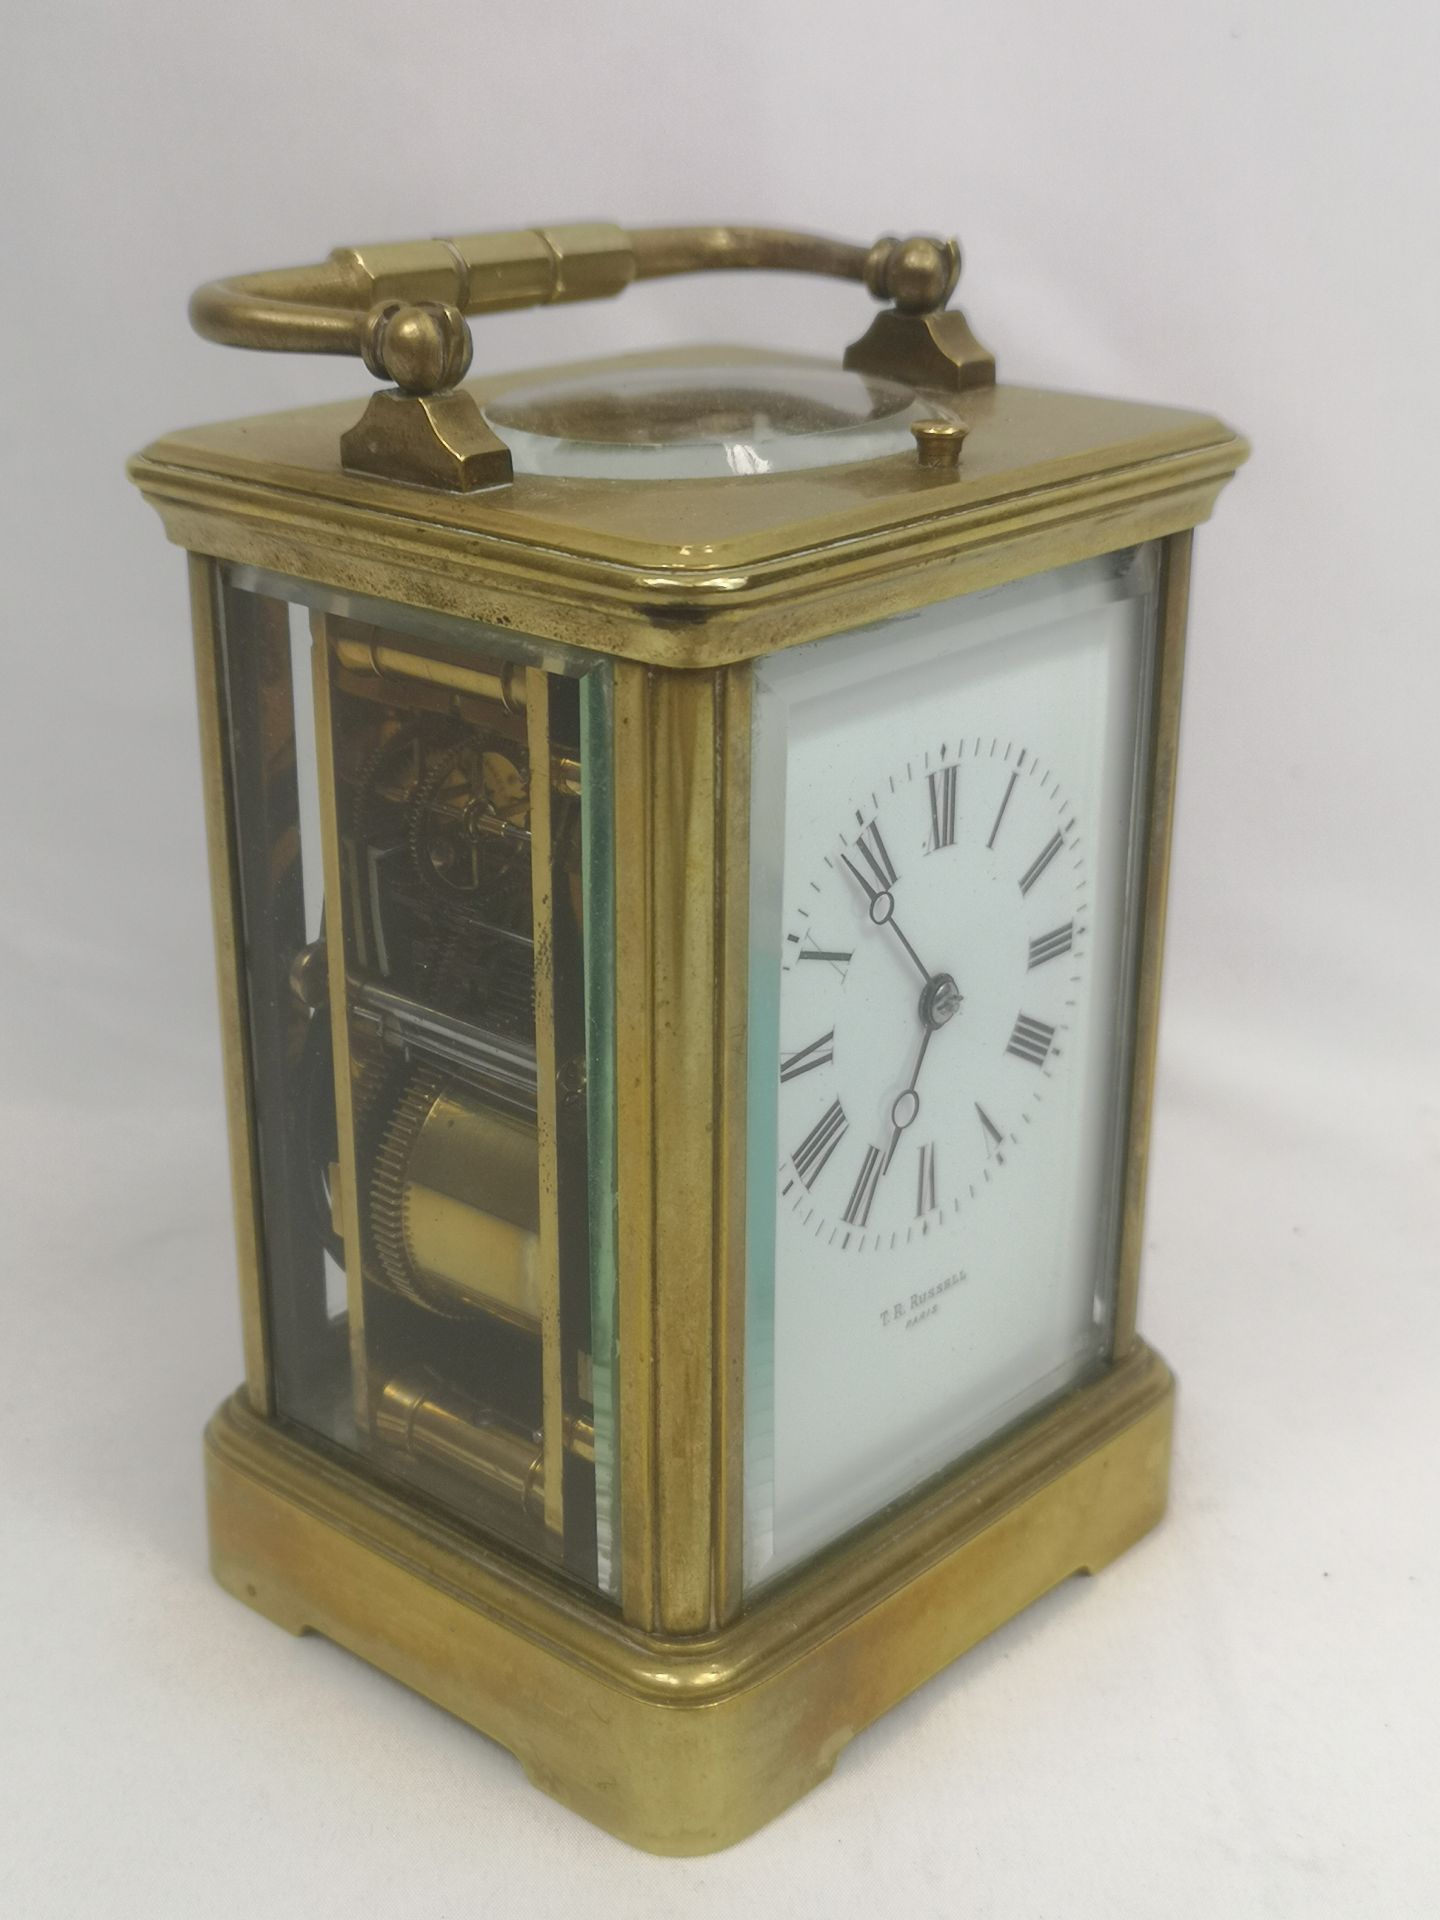 Brass carriage clock written to face T.R. Russell - Image 5 of 6